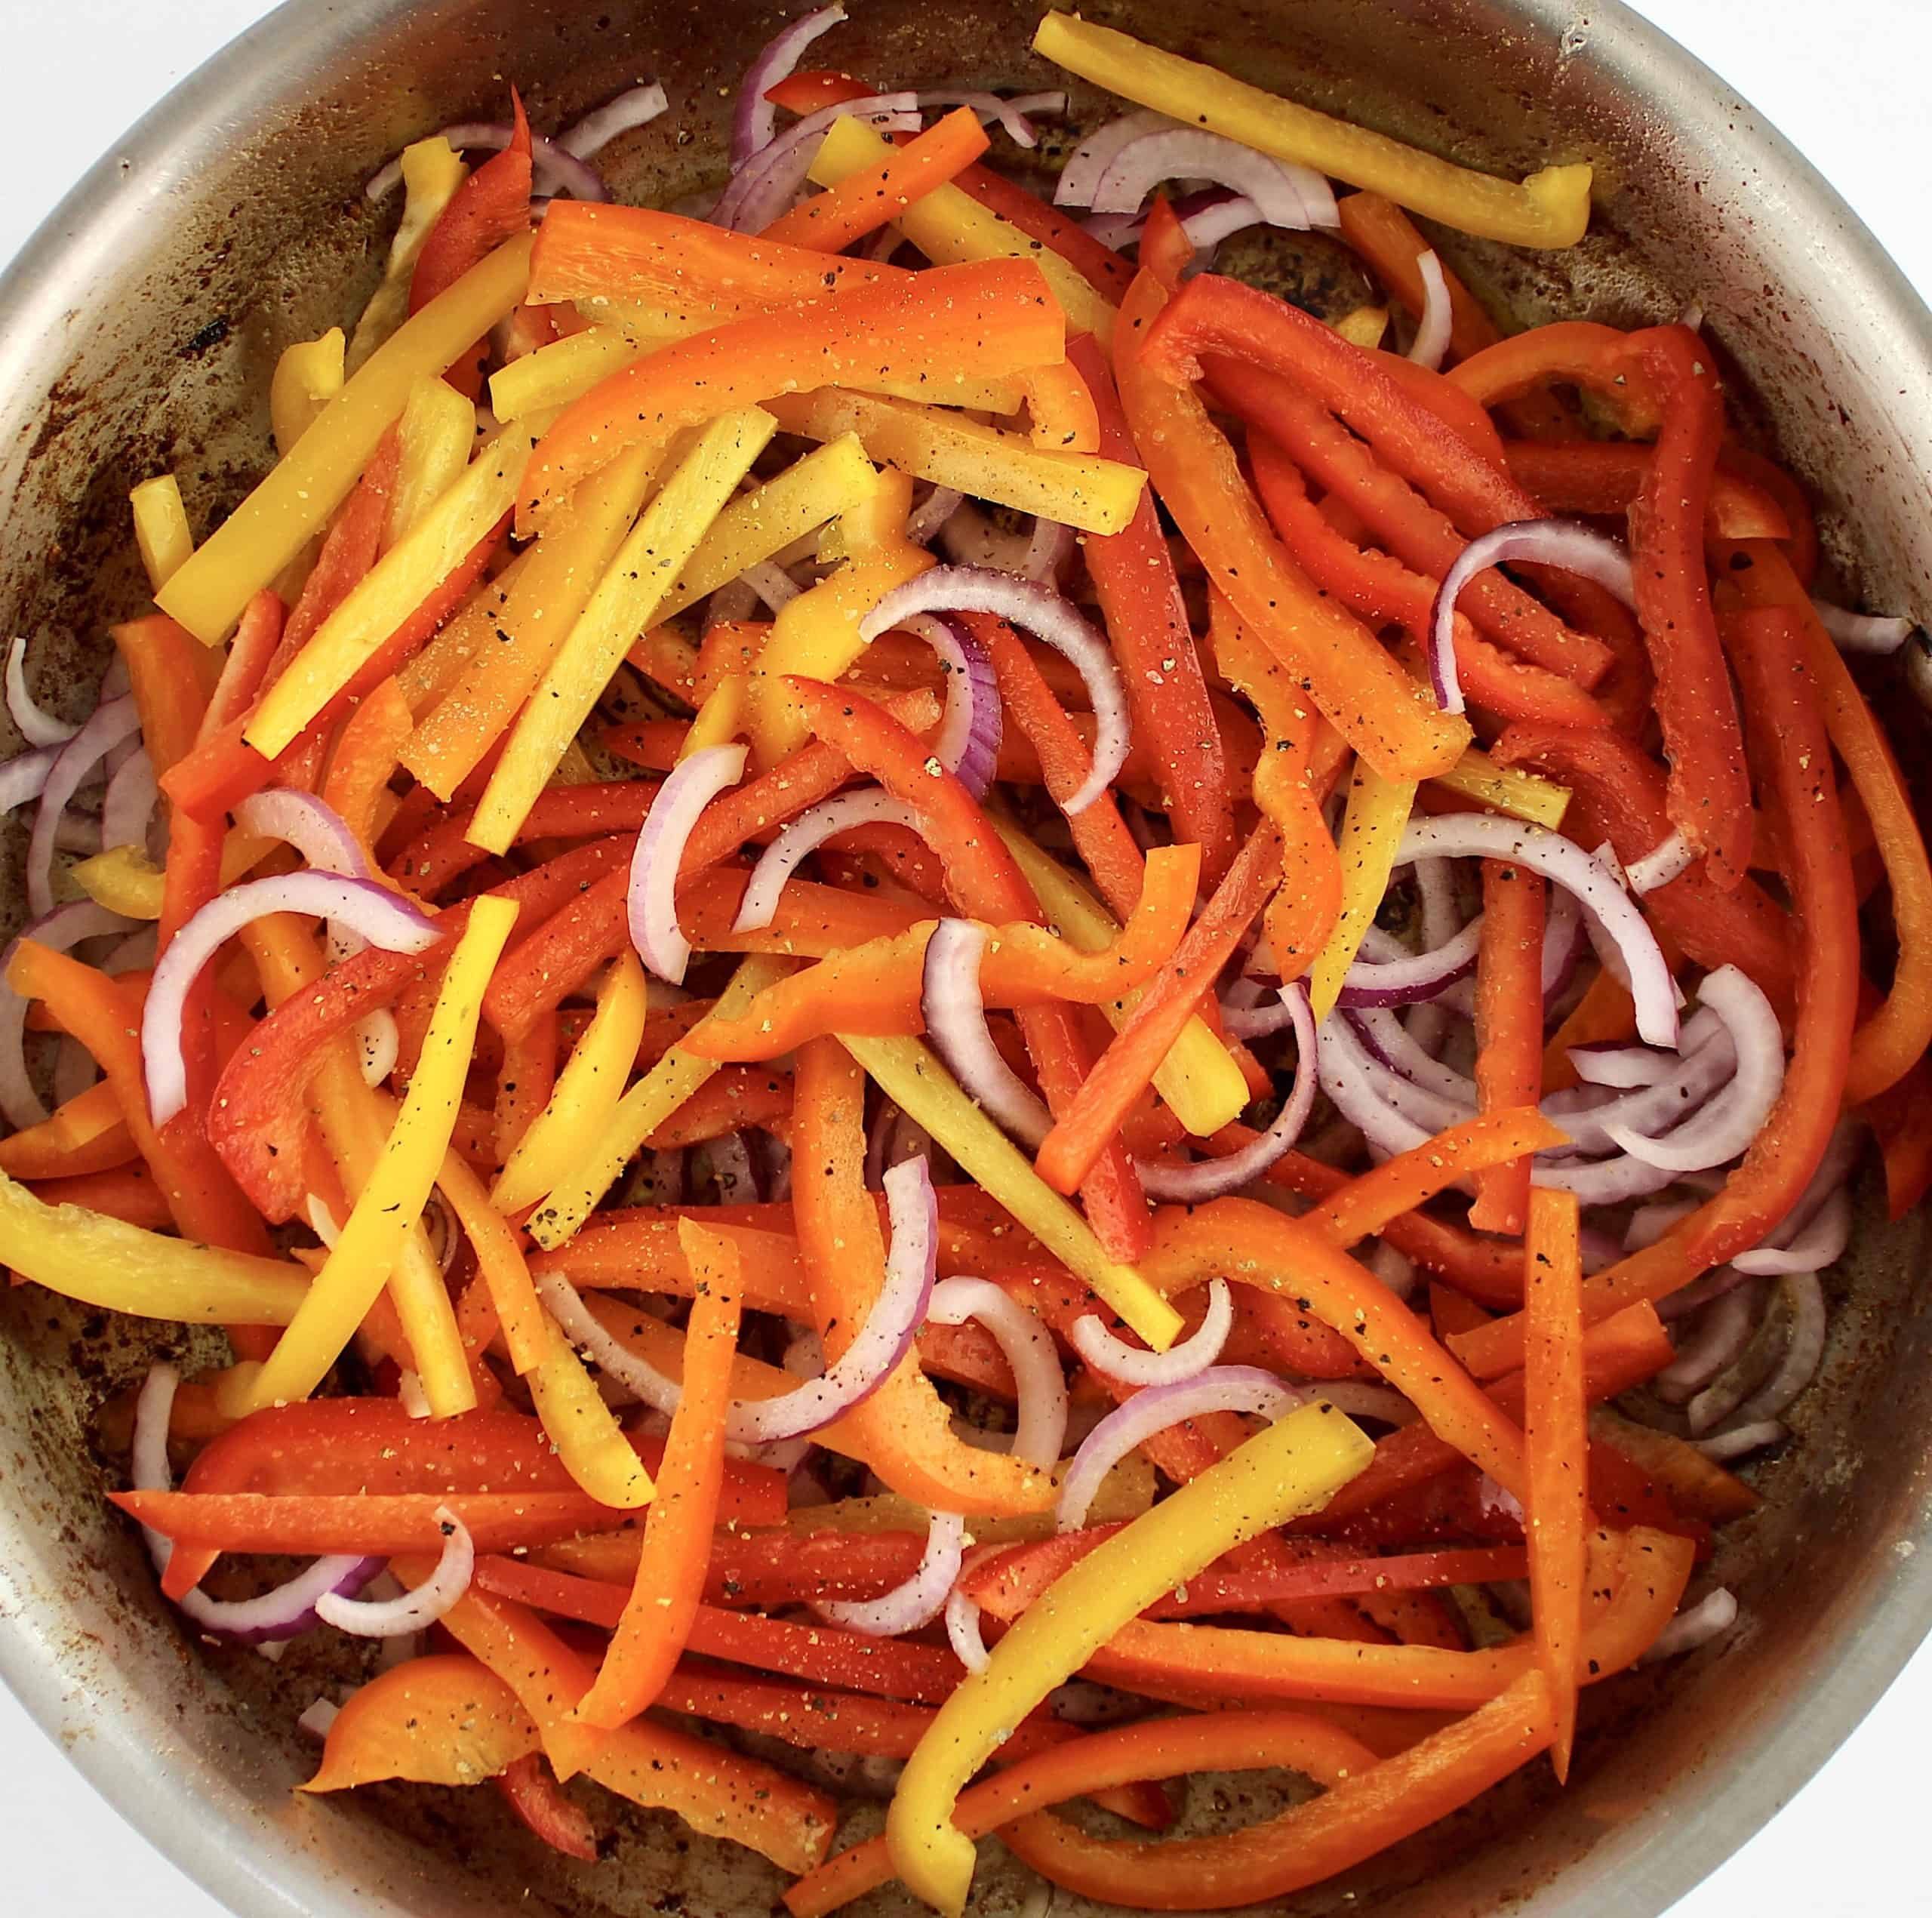 sliced red yellow and orange bell peppers and red onions in skillet uncooked